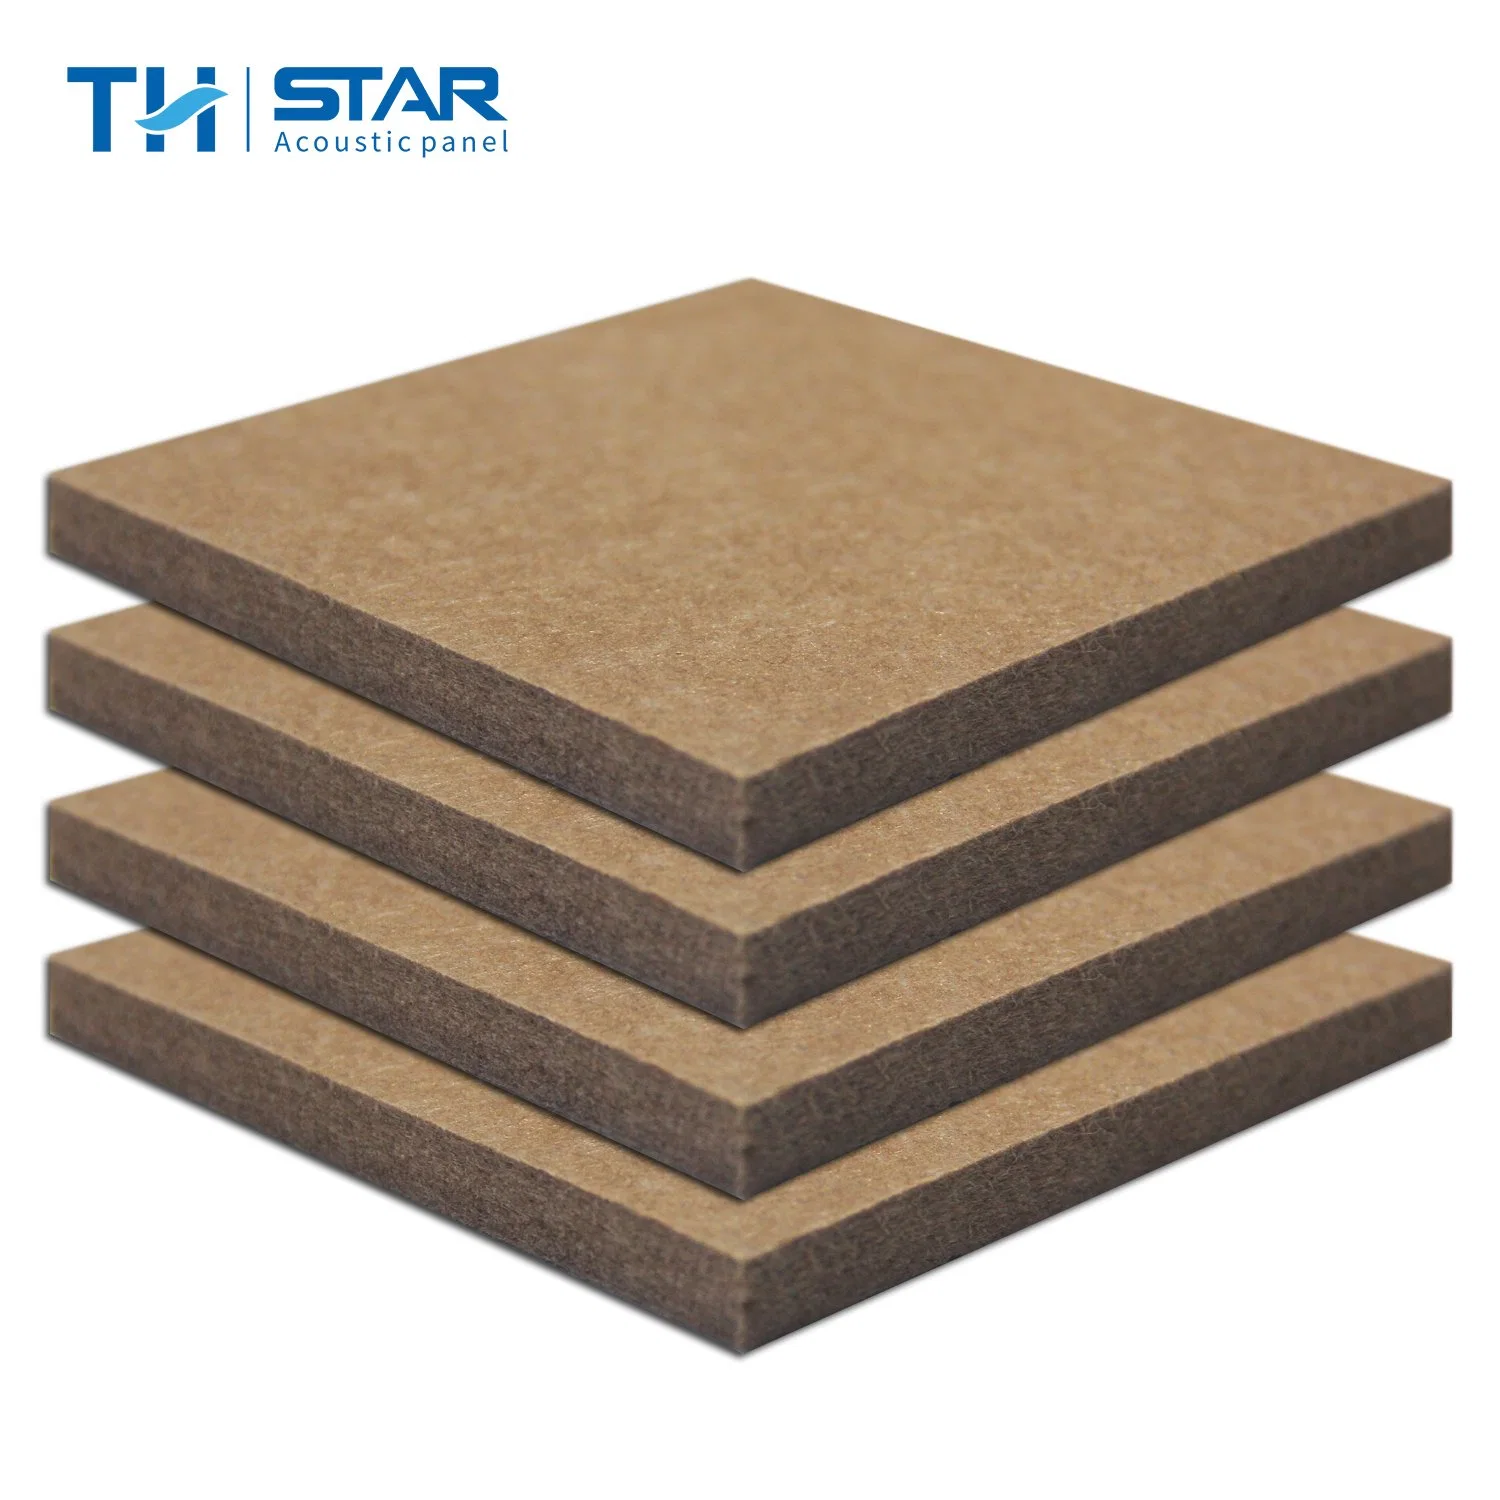 100% Polyester Acoustic Pet Panel